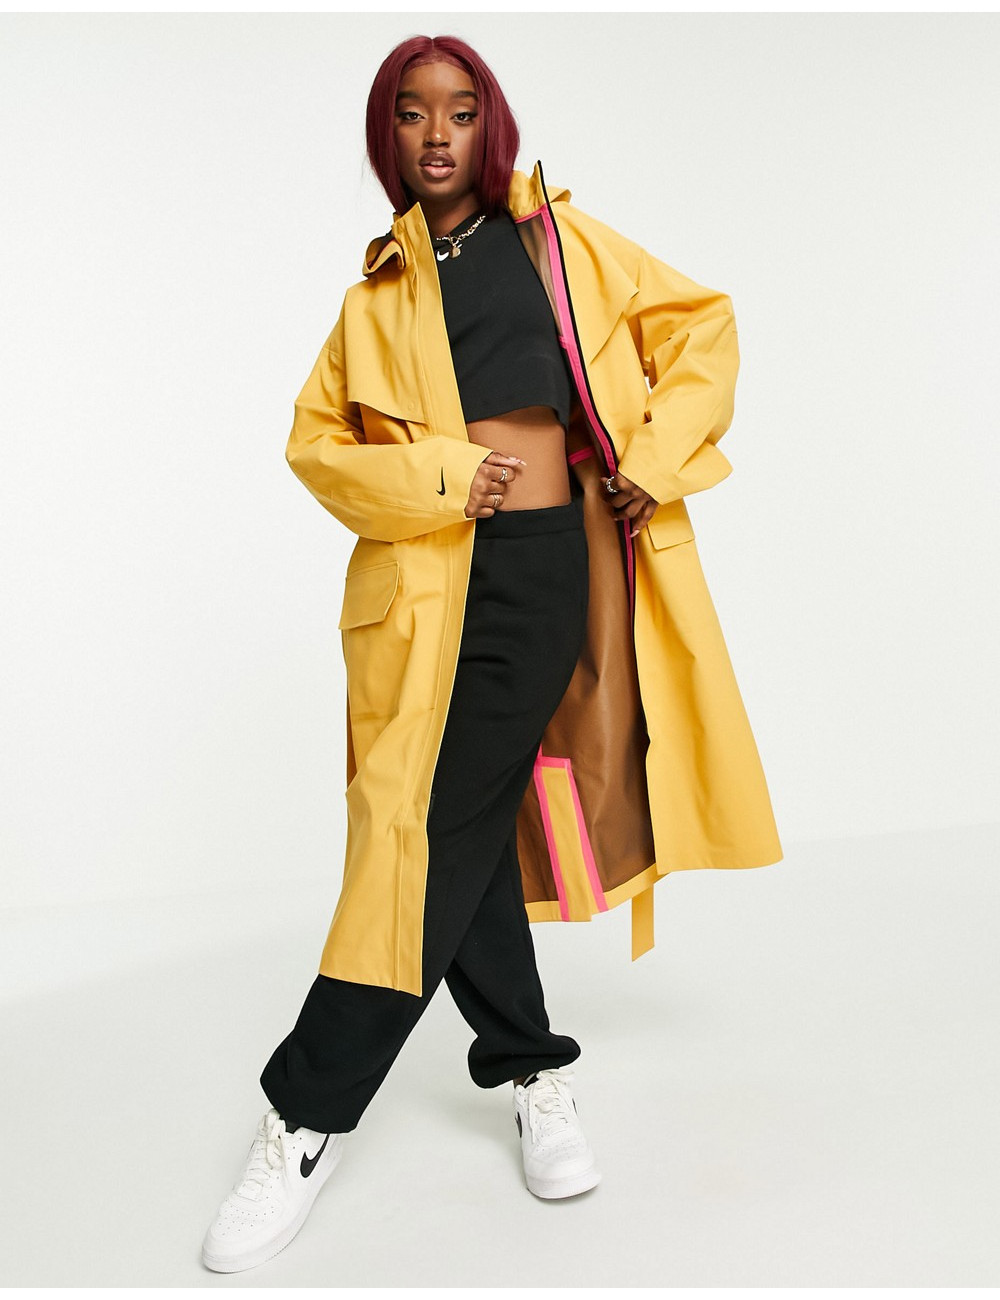 Nike woven trench coat in...